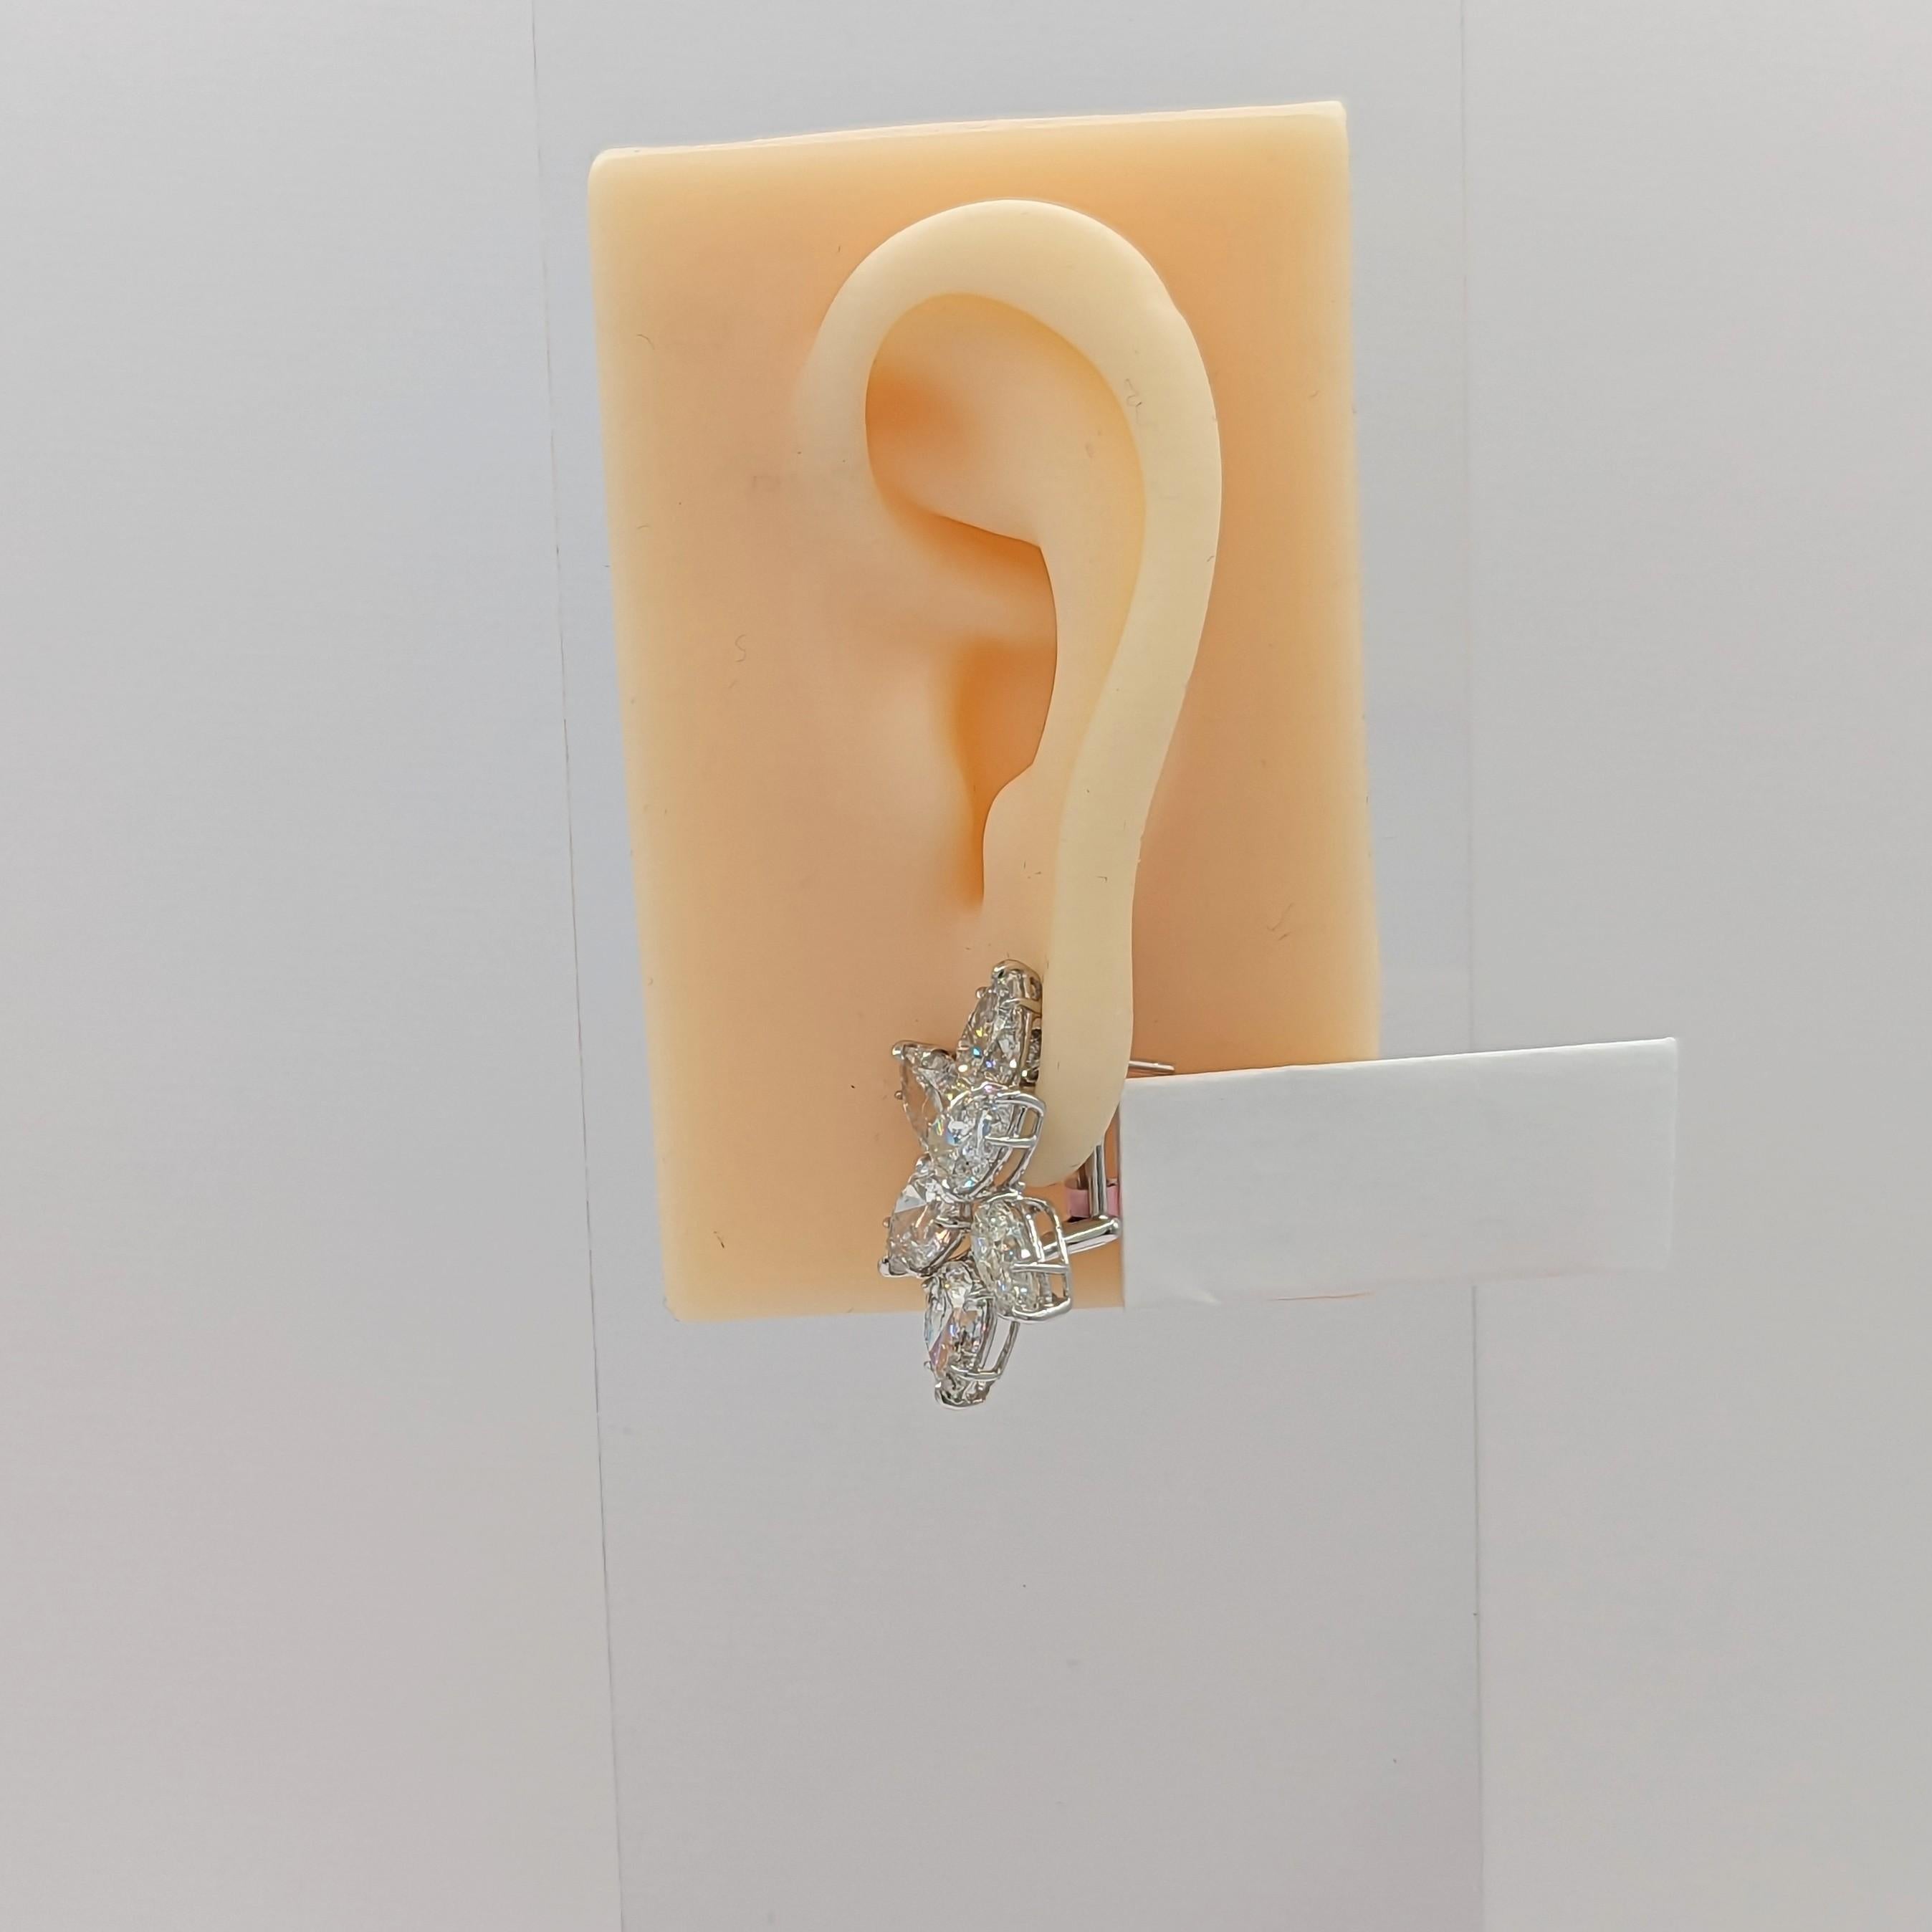 Absolutely stunning cluster diamond earrings featuring 18.12 ct. white diamond pear shapes (total of 12 stones).  Handmade in 18k white gold.  Secure lever back and post closure.  